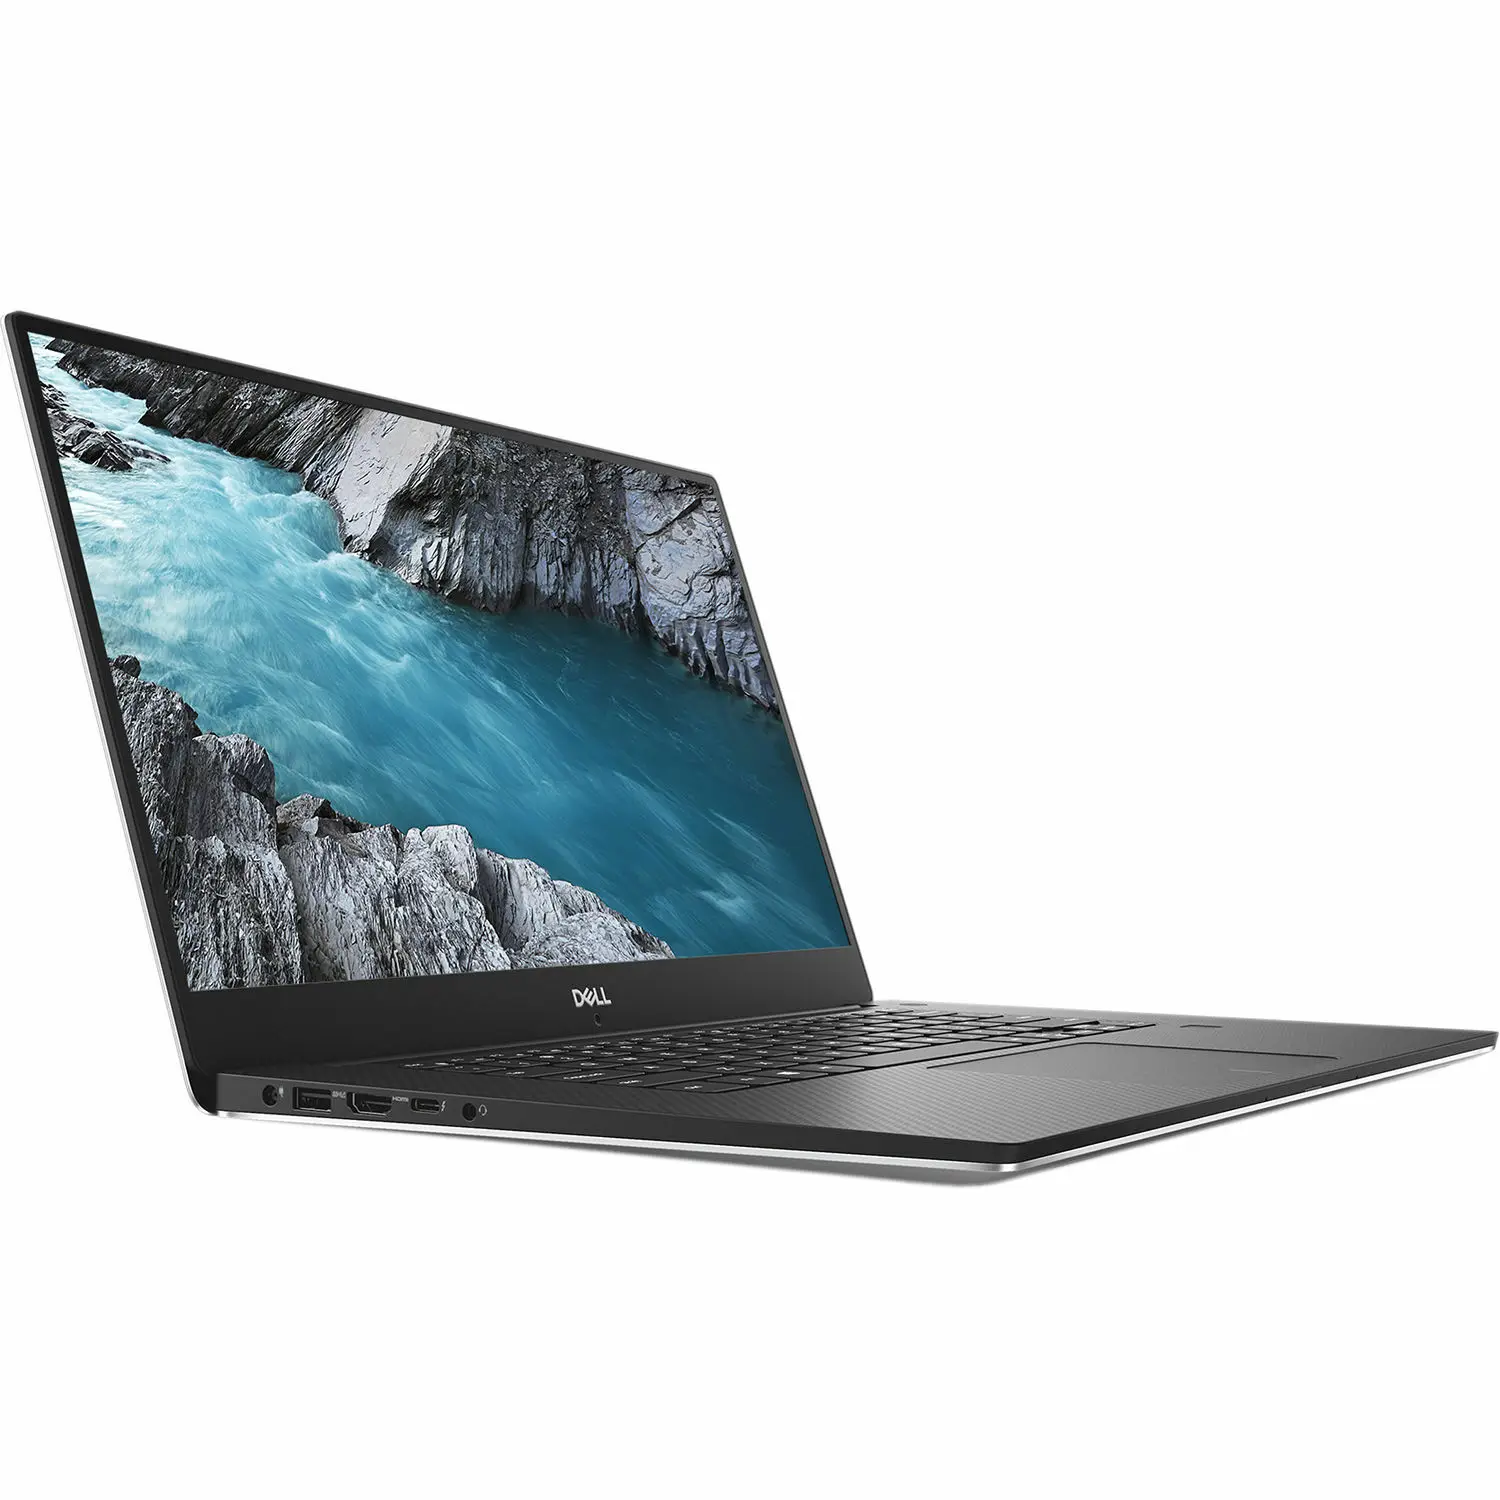 

Xps Laptop I9-11900h 2.5ghz 64gb 2tb Ssd Rtx 3060 17inch Uhd Touch Gaming Laptop